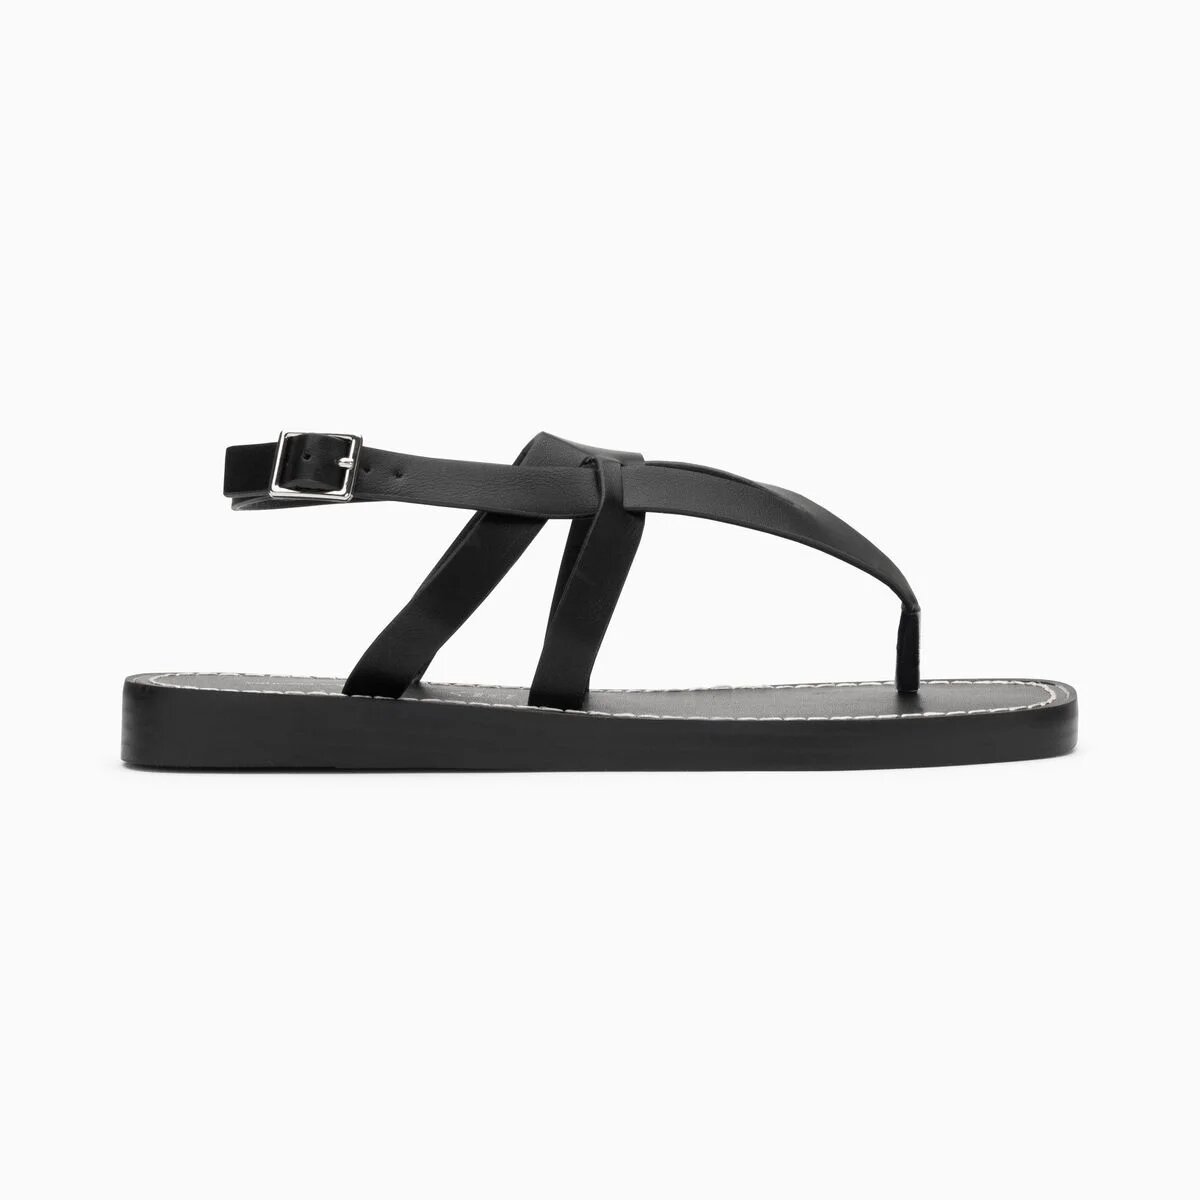 Black leather strap sandals by Vanessa Wu